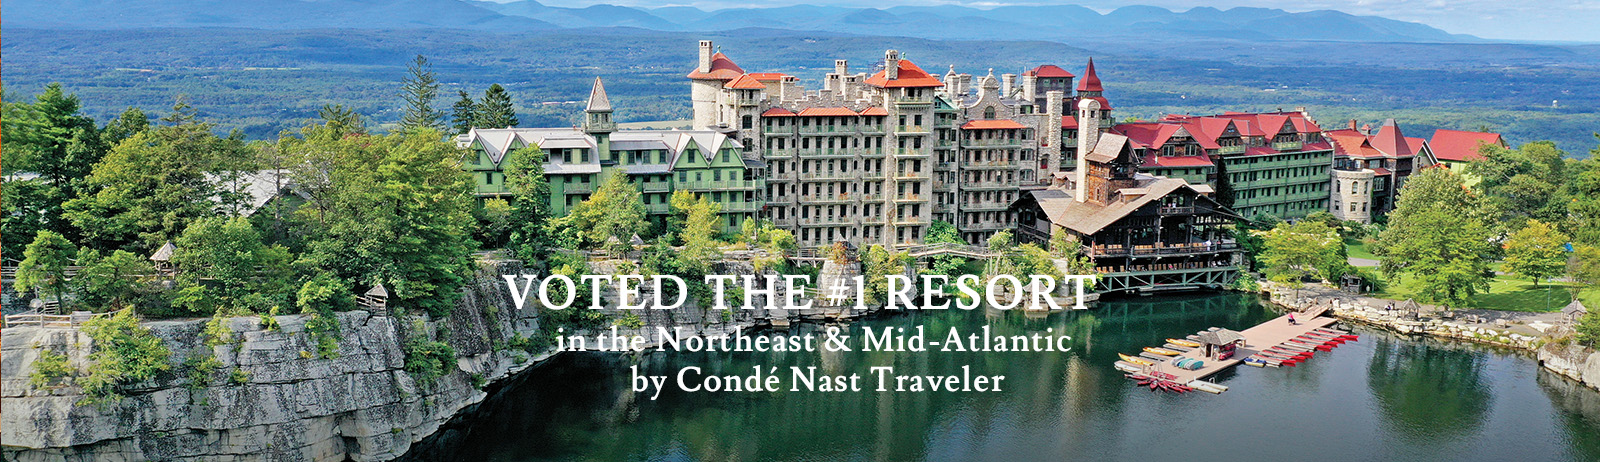 Aerial view of Mohonk Mountain House resort in Upstate NY